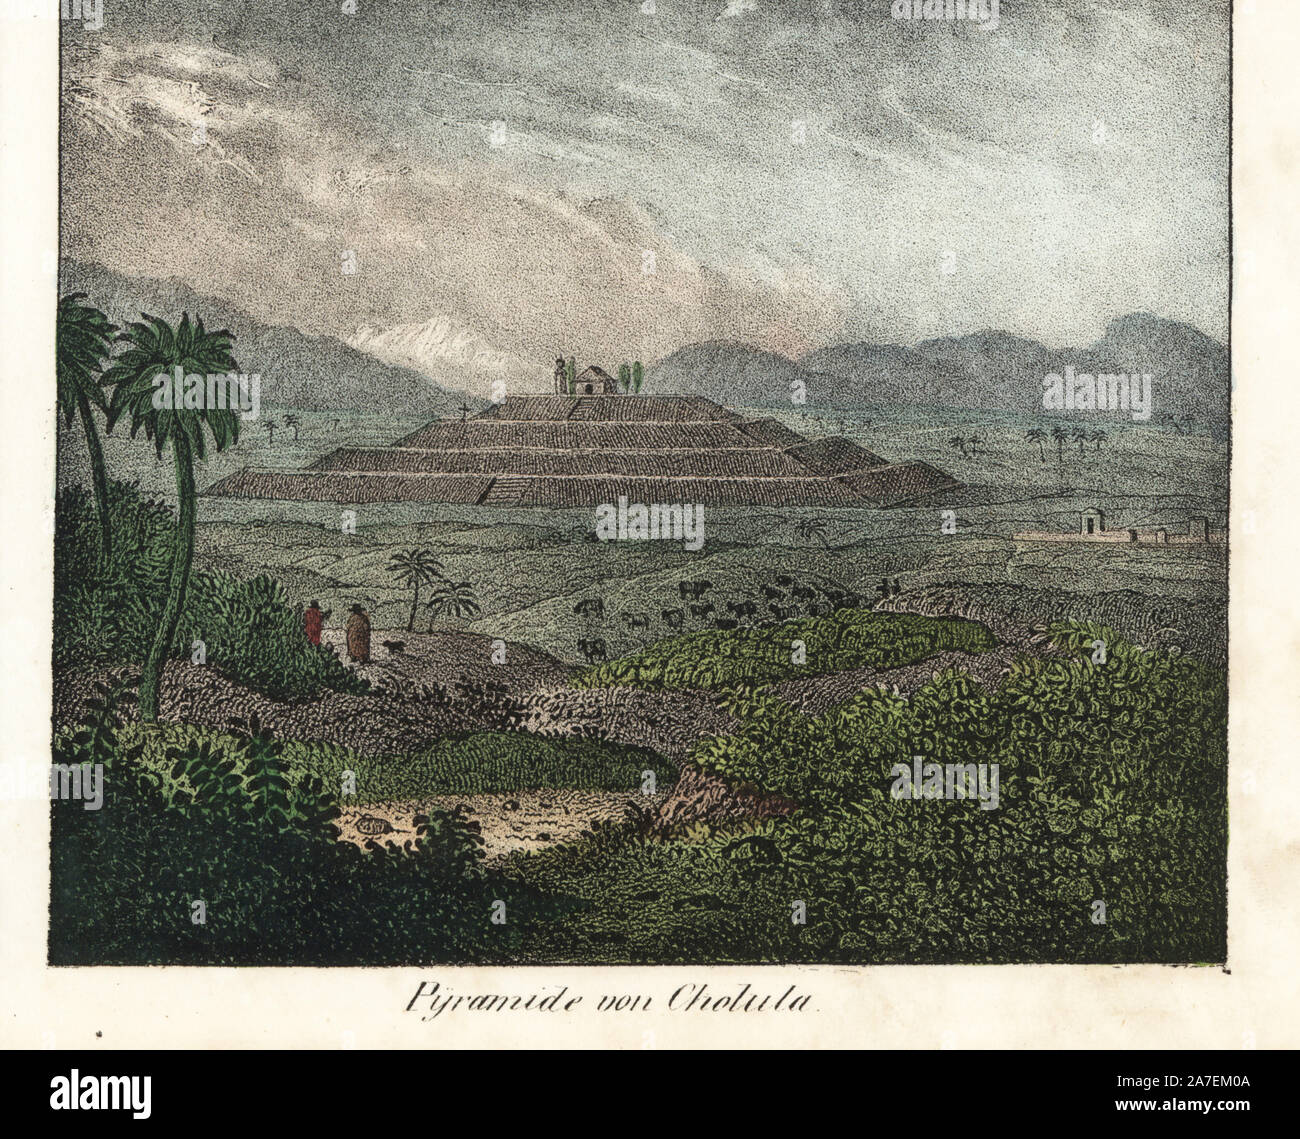 Great Pyramid of Cholula or Tlachihualtepetl dedicated to the god Quetzalcoatl in Mexico. Handcoloured lithograph from Friedrich Wilhelm Goedsche's 'Vollstaendige Völkergallerie in getreuen Abbildungen' (Complete Gallery of Peoples in True Pictures), Meissen, circa 1835-1840. Goedsche (1785-1863) was a German writer, bookseller and publisher in Meissen. Many of the illustrations were adapted from Bertuch's 'Bilderbuch fur Kinder' and others. Stock Photo